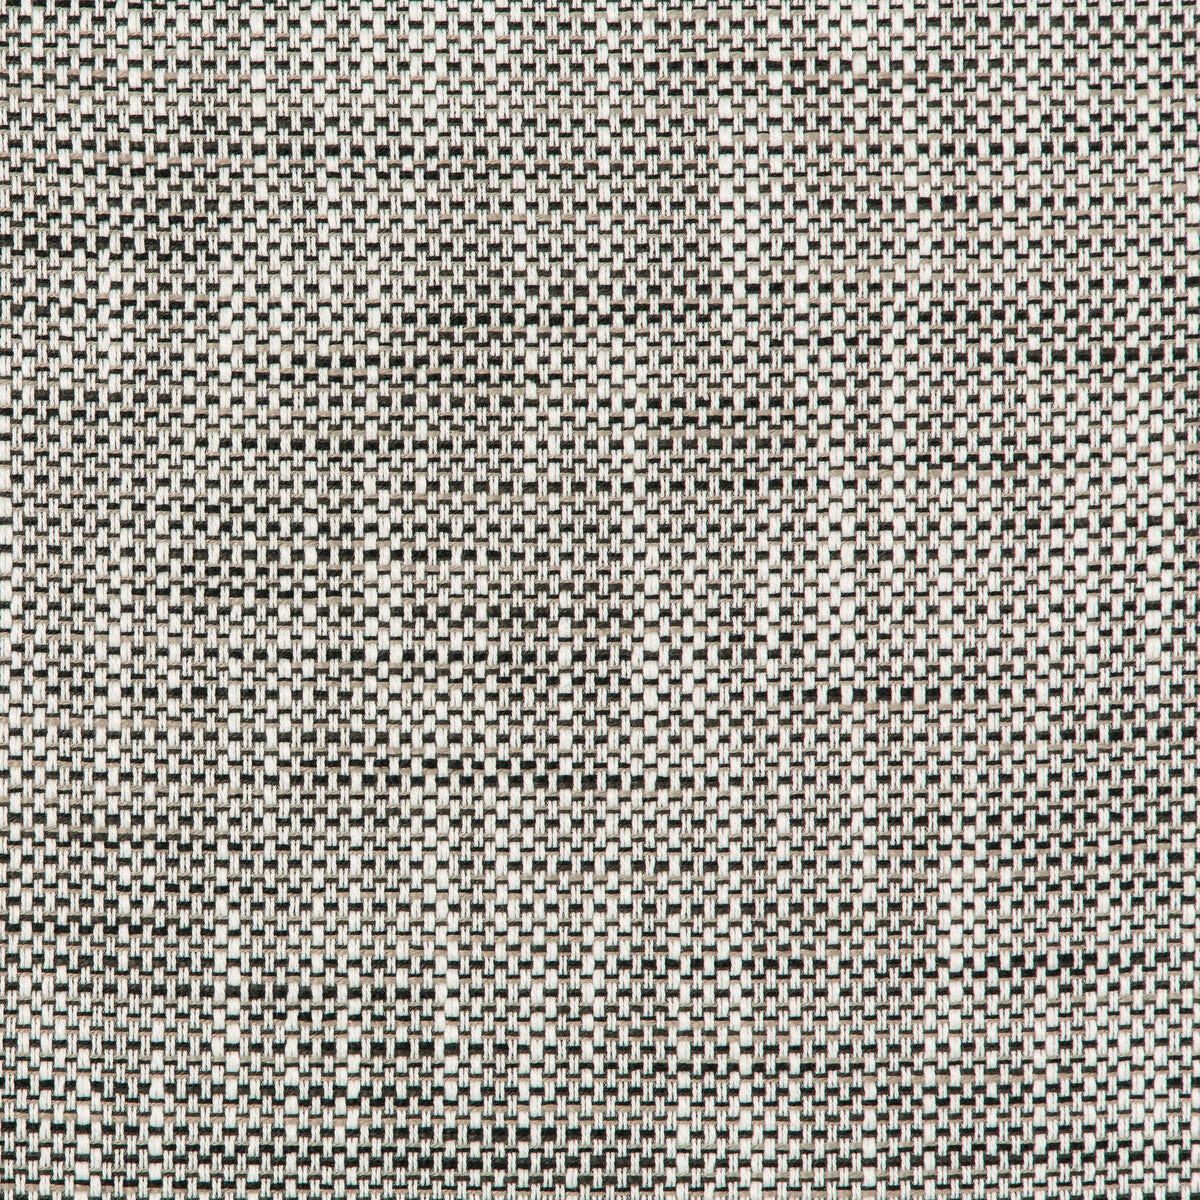 Kravet Design fabric in 36082-81 color - pattern 36082.81.0 - by Kravet Design in the Inside Out Performance Fabrics collection